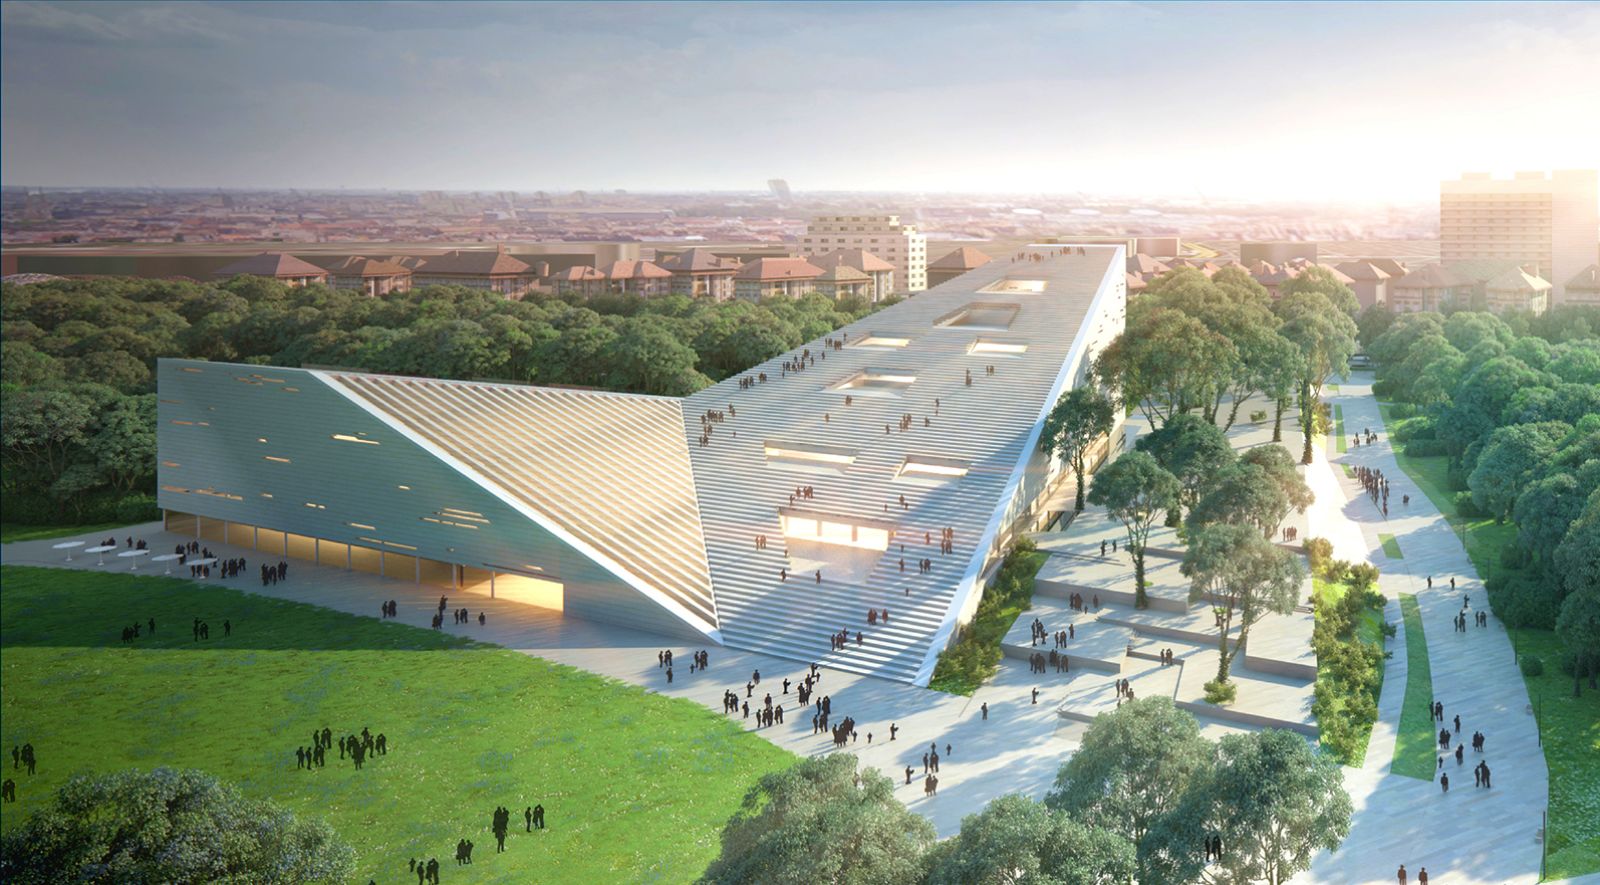 New National Gallery and Ludwig Museum Budapest